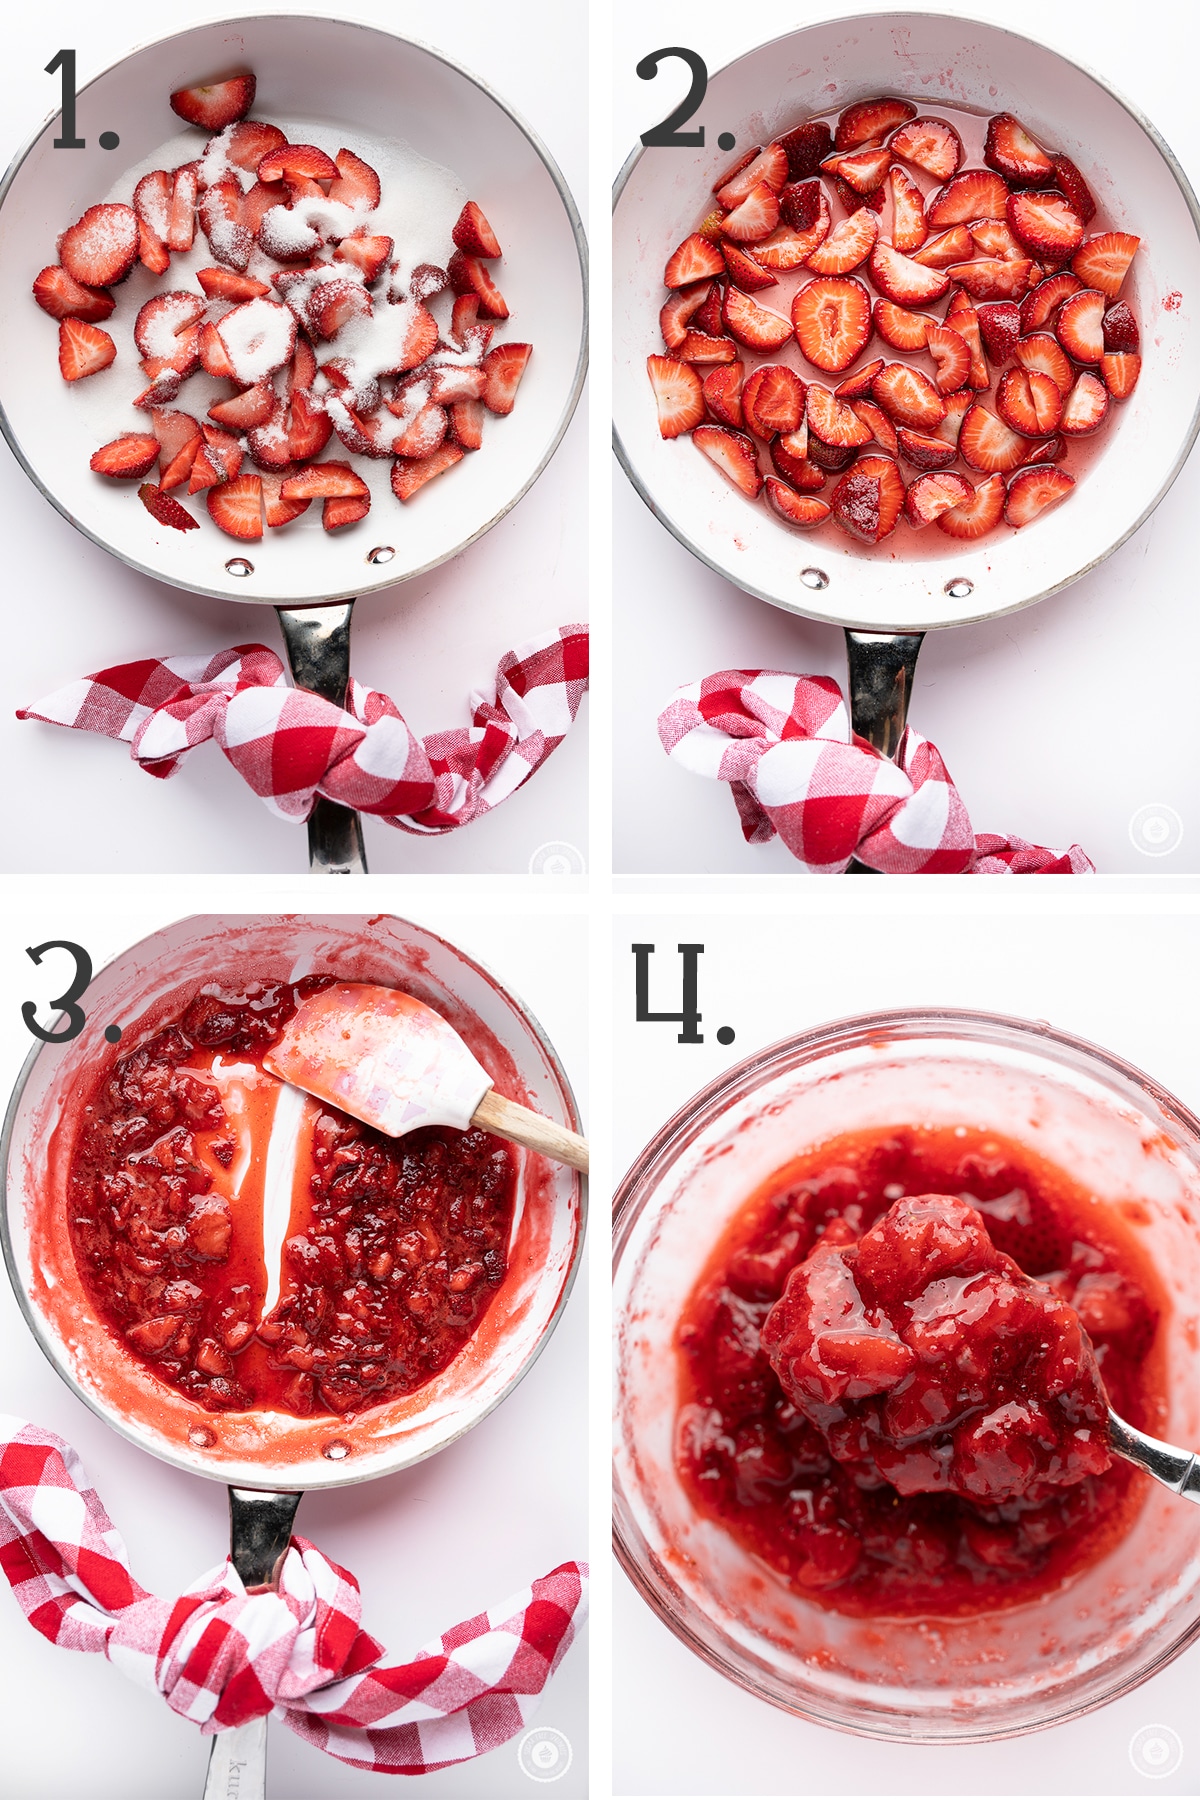 Four panel photo illustrating how the strawberry ripple is made.   Top down shots of strawberries in a bright white pan in stages from raw to cooked